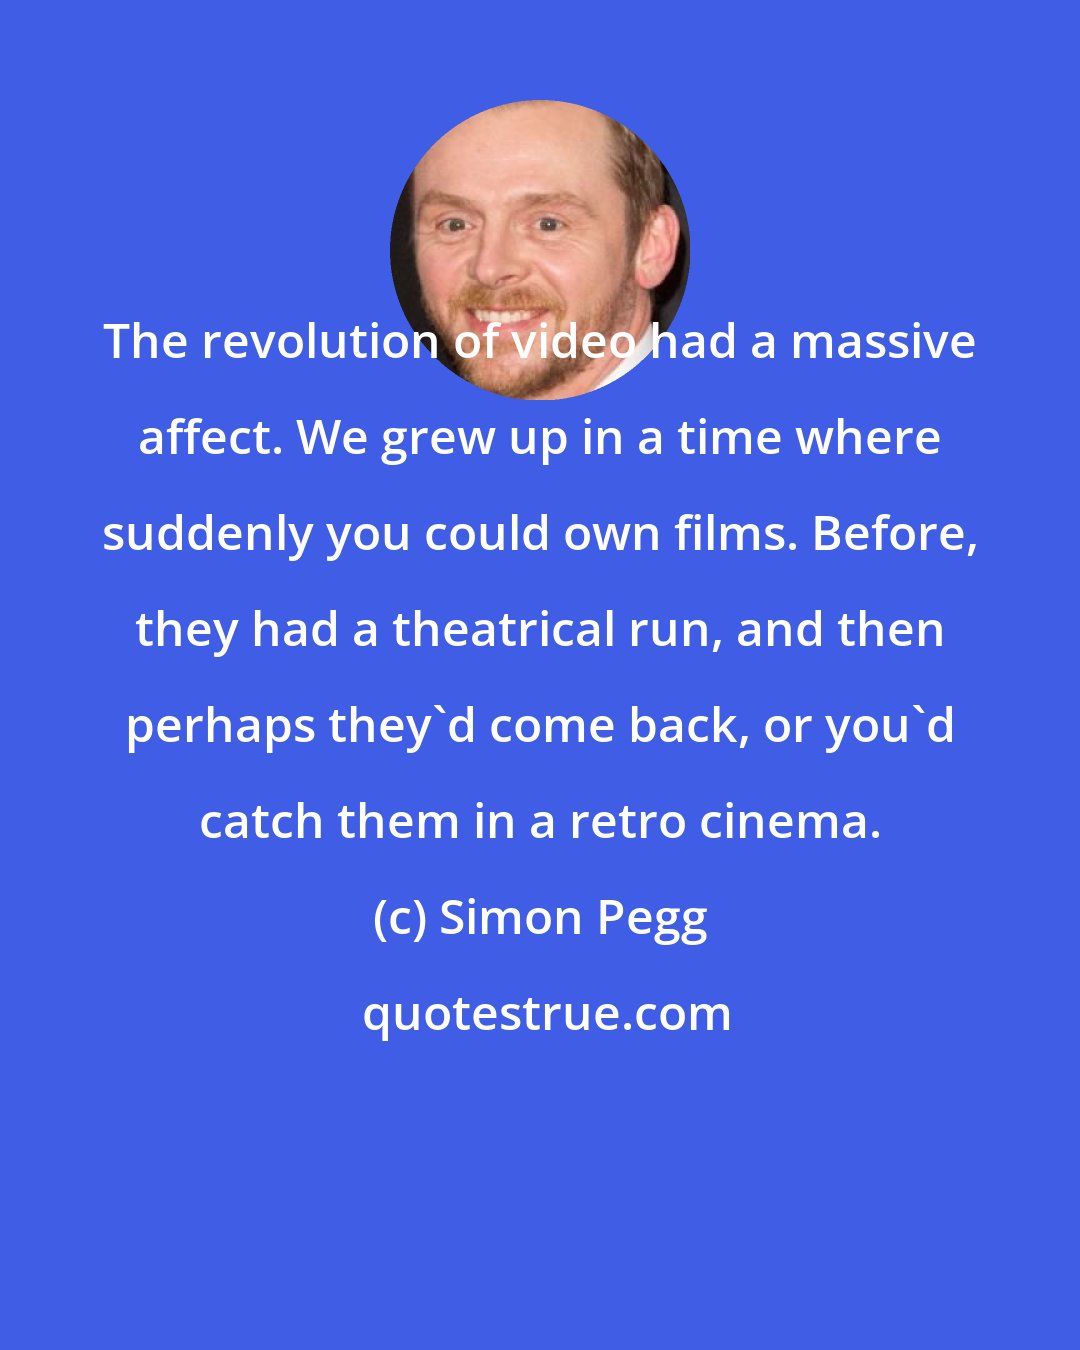 Simon Pegg: The revolution of video had a massive affect. We grew up in a time where suddenly you could own films. Before, they had a theatrical run, and then perhaps they'd come back, or you'd catch them in a retro cinema.